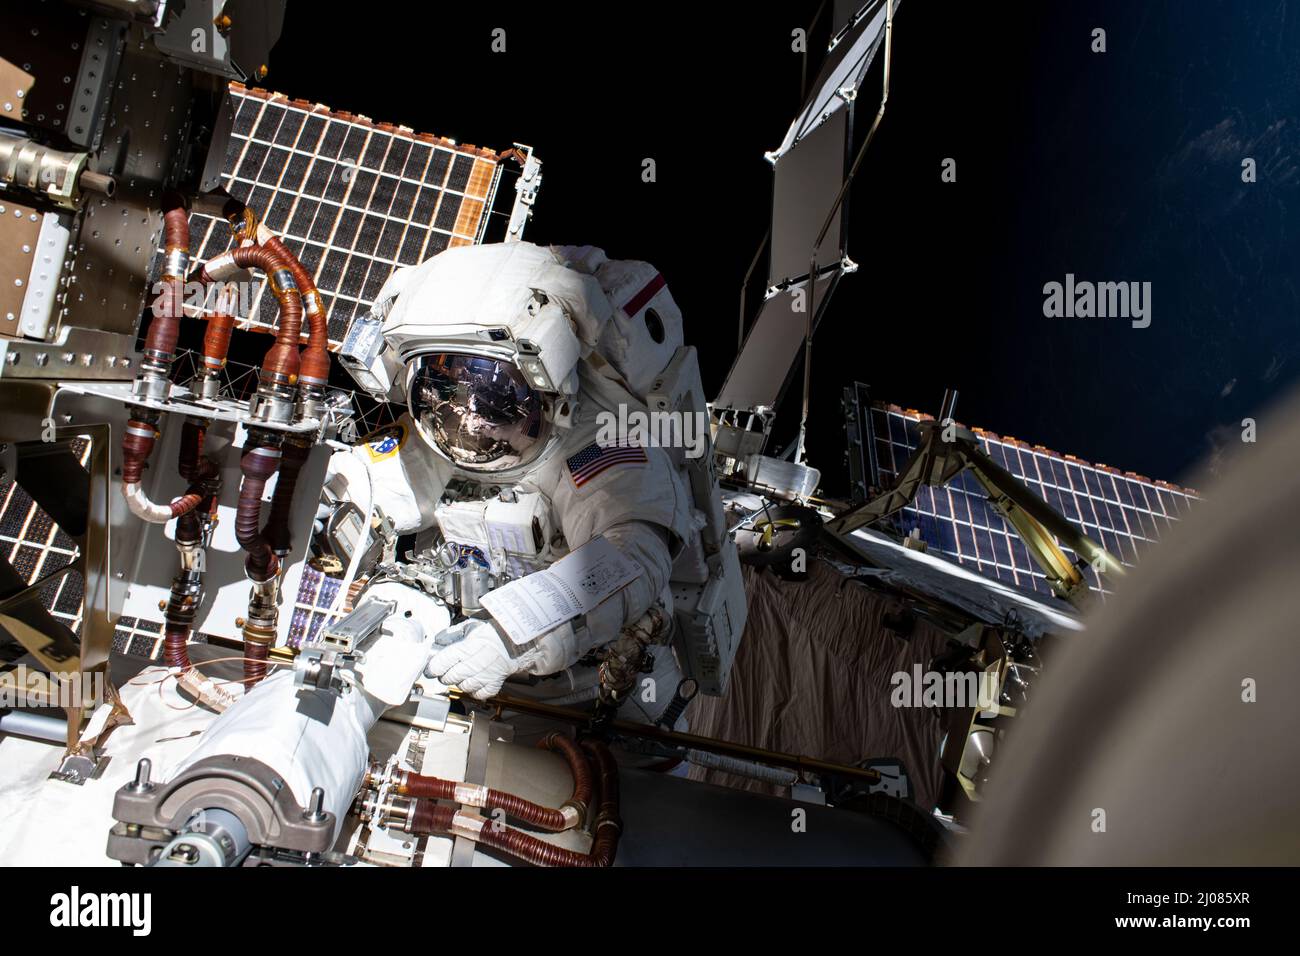 International Space Station, Earth Orbit. 15th Mar, 2022. International Space Station, EARTH ORBIT. 15 March, 2022. NASA astronaut Kayla Barron, installs a modification kit on the International Space Station's Port-4 truss segment during a nearly 7 hour long spacewalk to prepare the International Space Station for the next roll-out solar array, March 15, 2022 in Earth Orbit. Credit: NASA/NASA/Alamy Live News Stock Photo